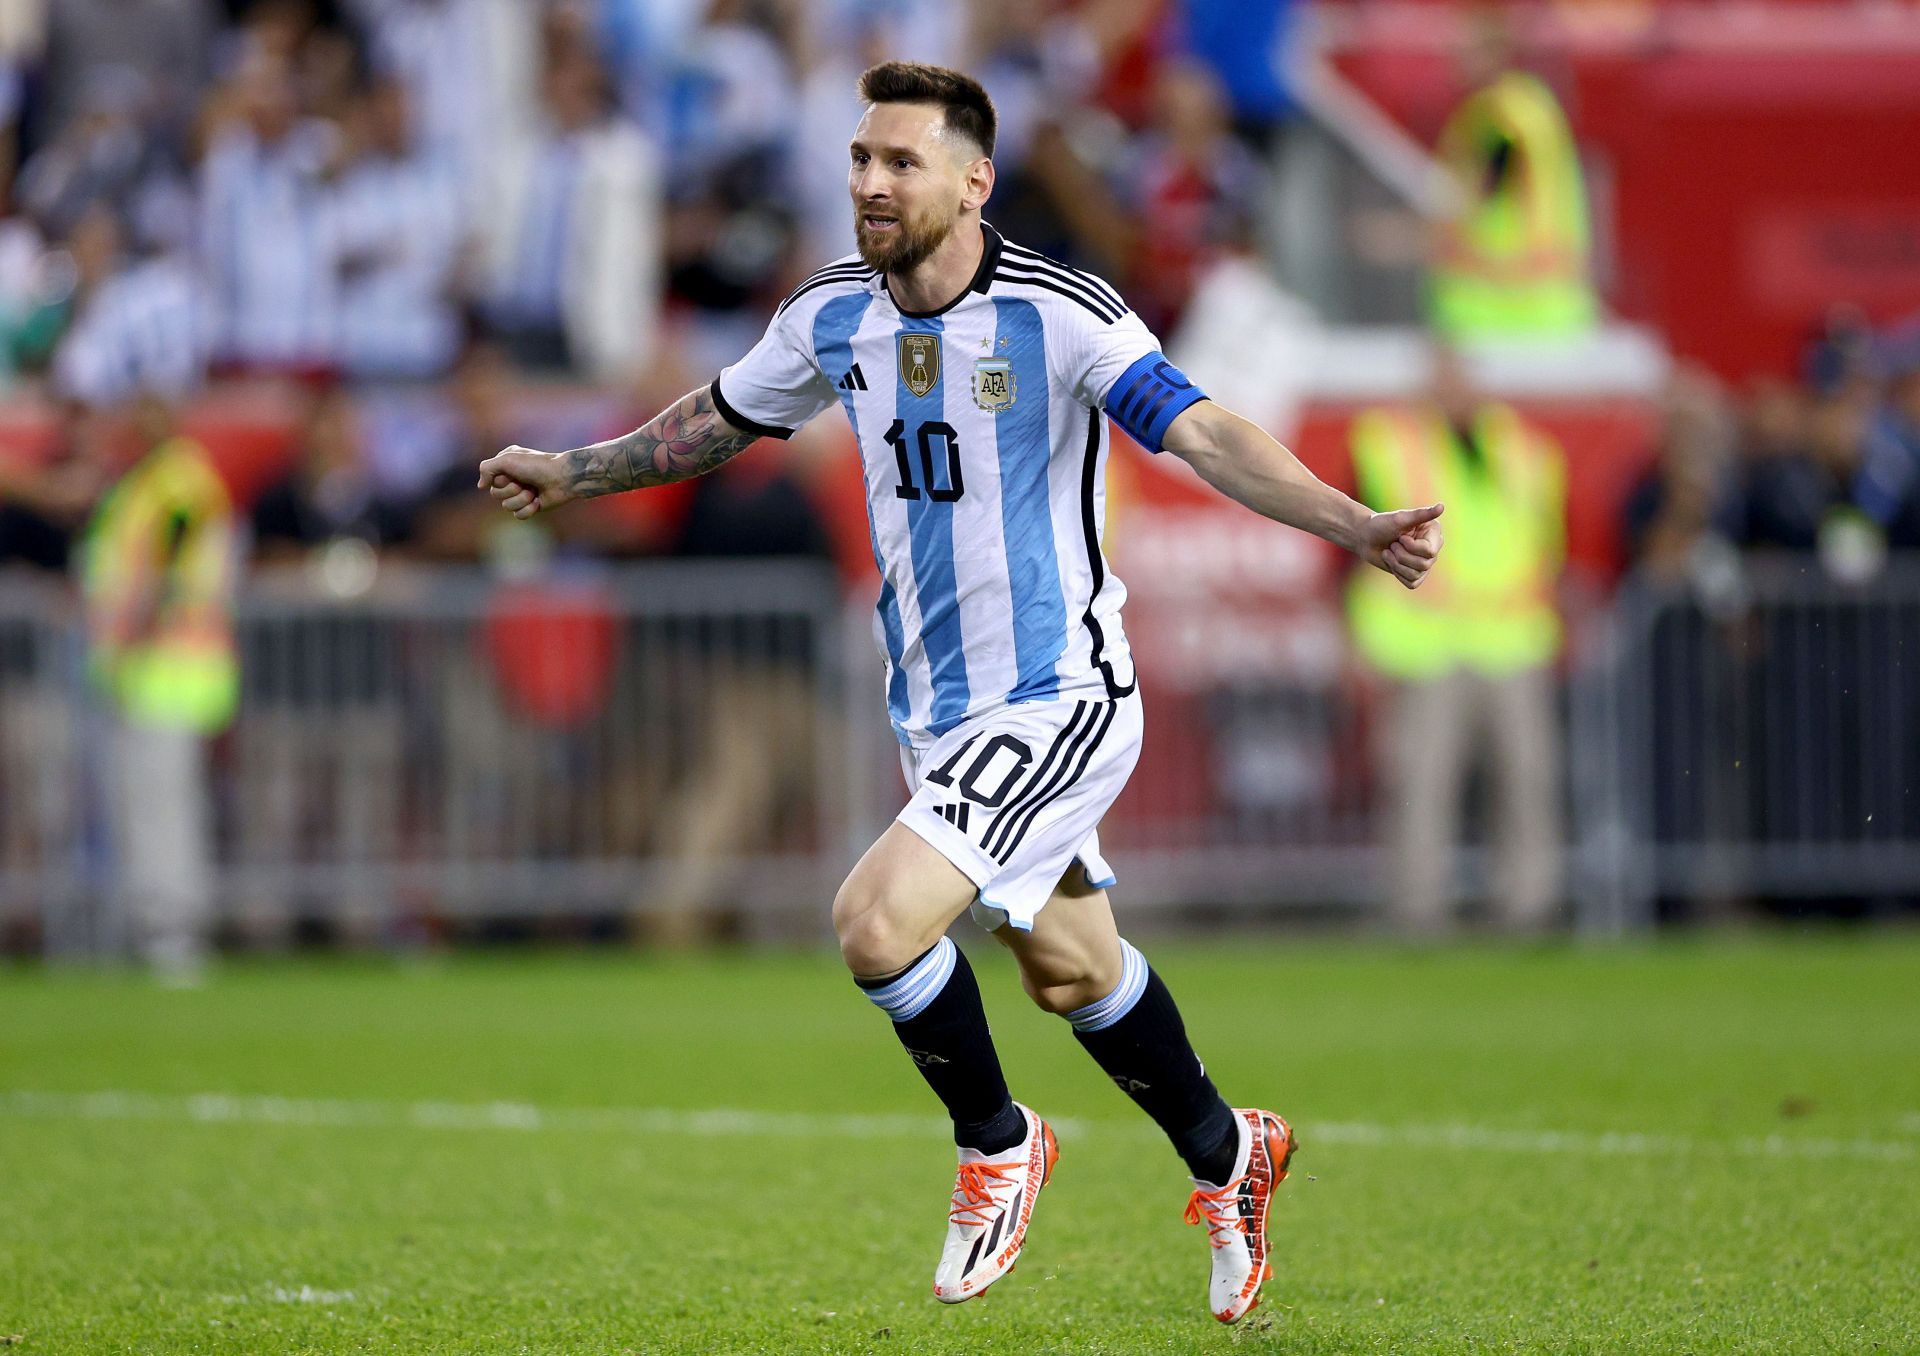 Lionel Messi will look to make a mark in the 2022 FIFA World Cup